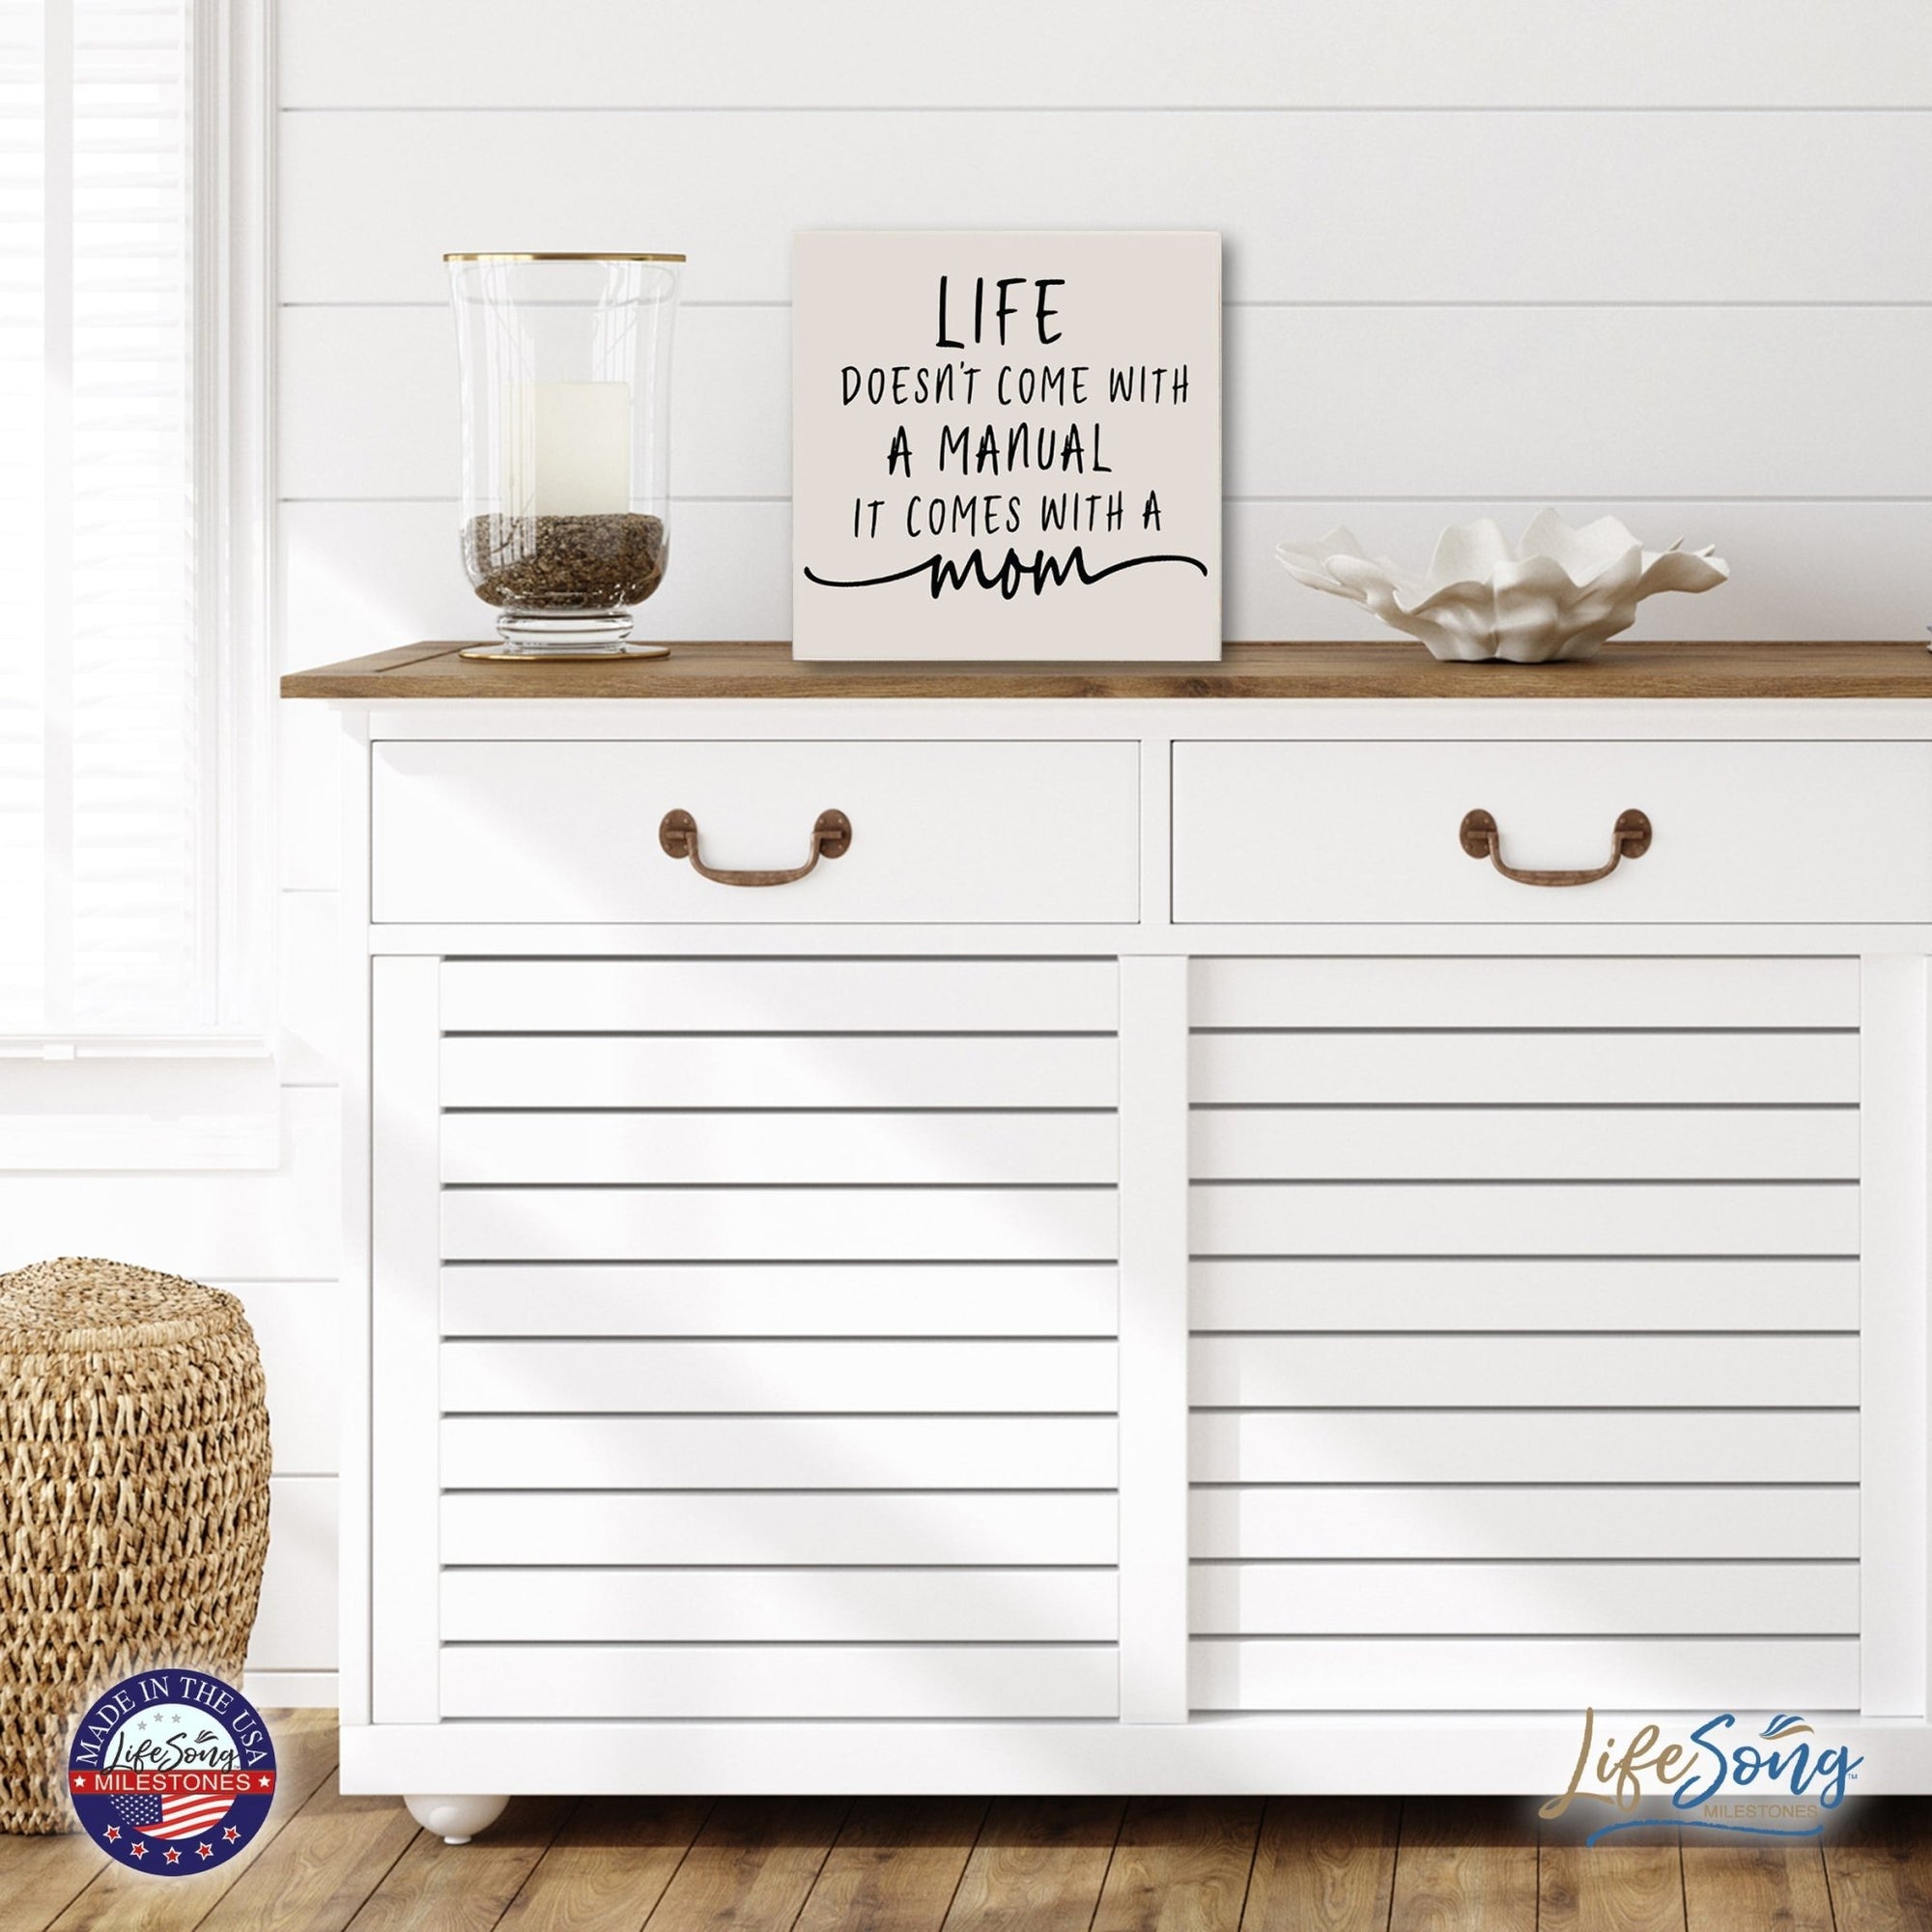 Modern Inspirational Shadow Box for Everyday Home Decorations For Mothers 6x6 - Life Doesn’t Come With - LifeSong Milestones